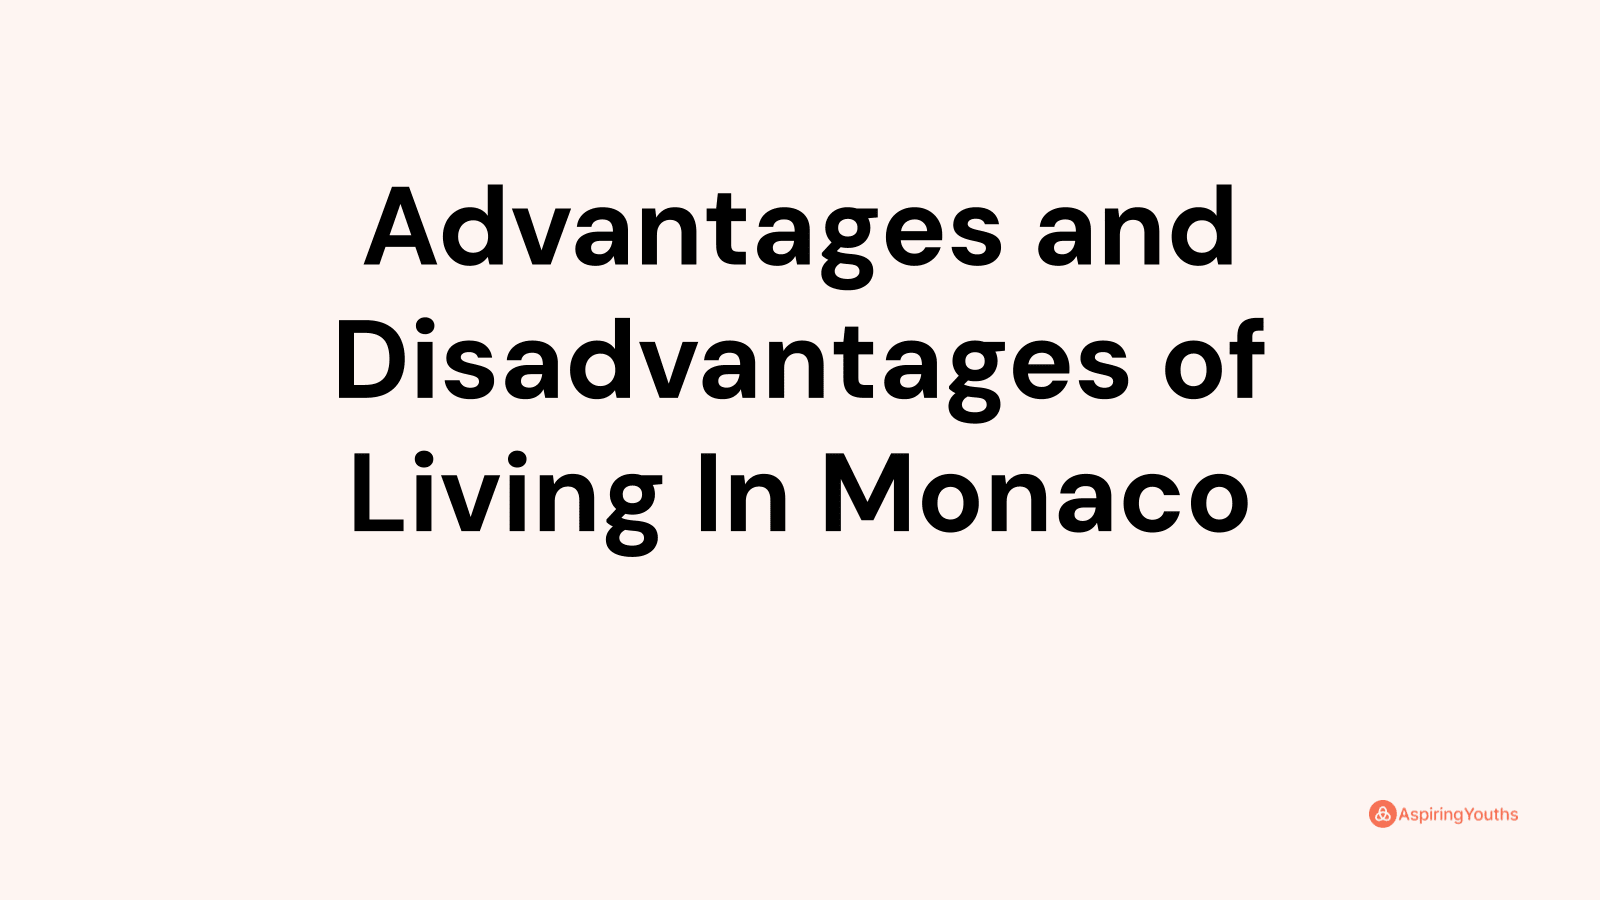 Advantages and disadvantages of Living In Monaco